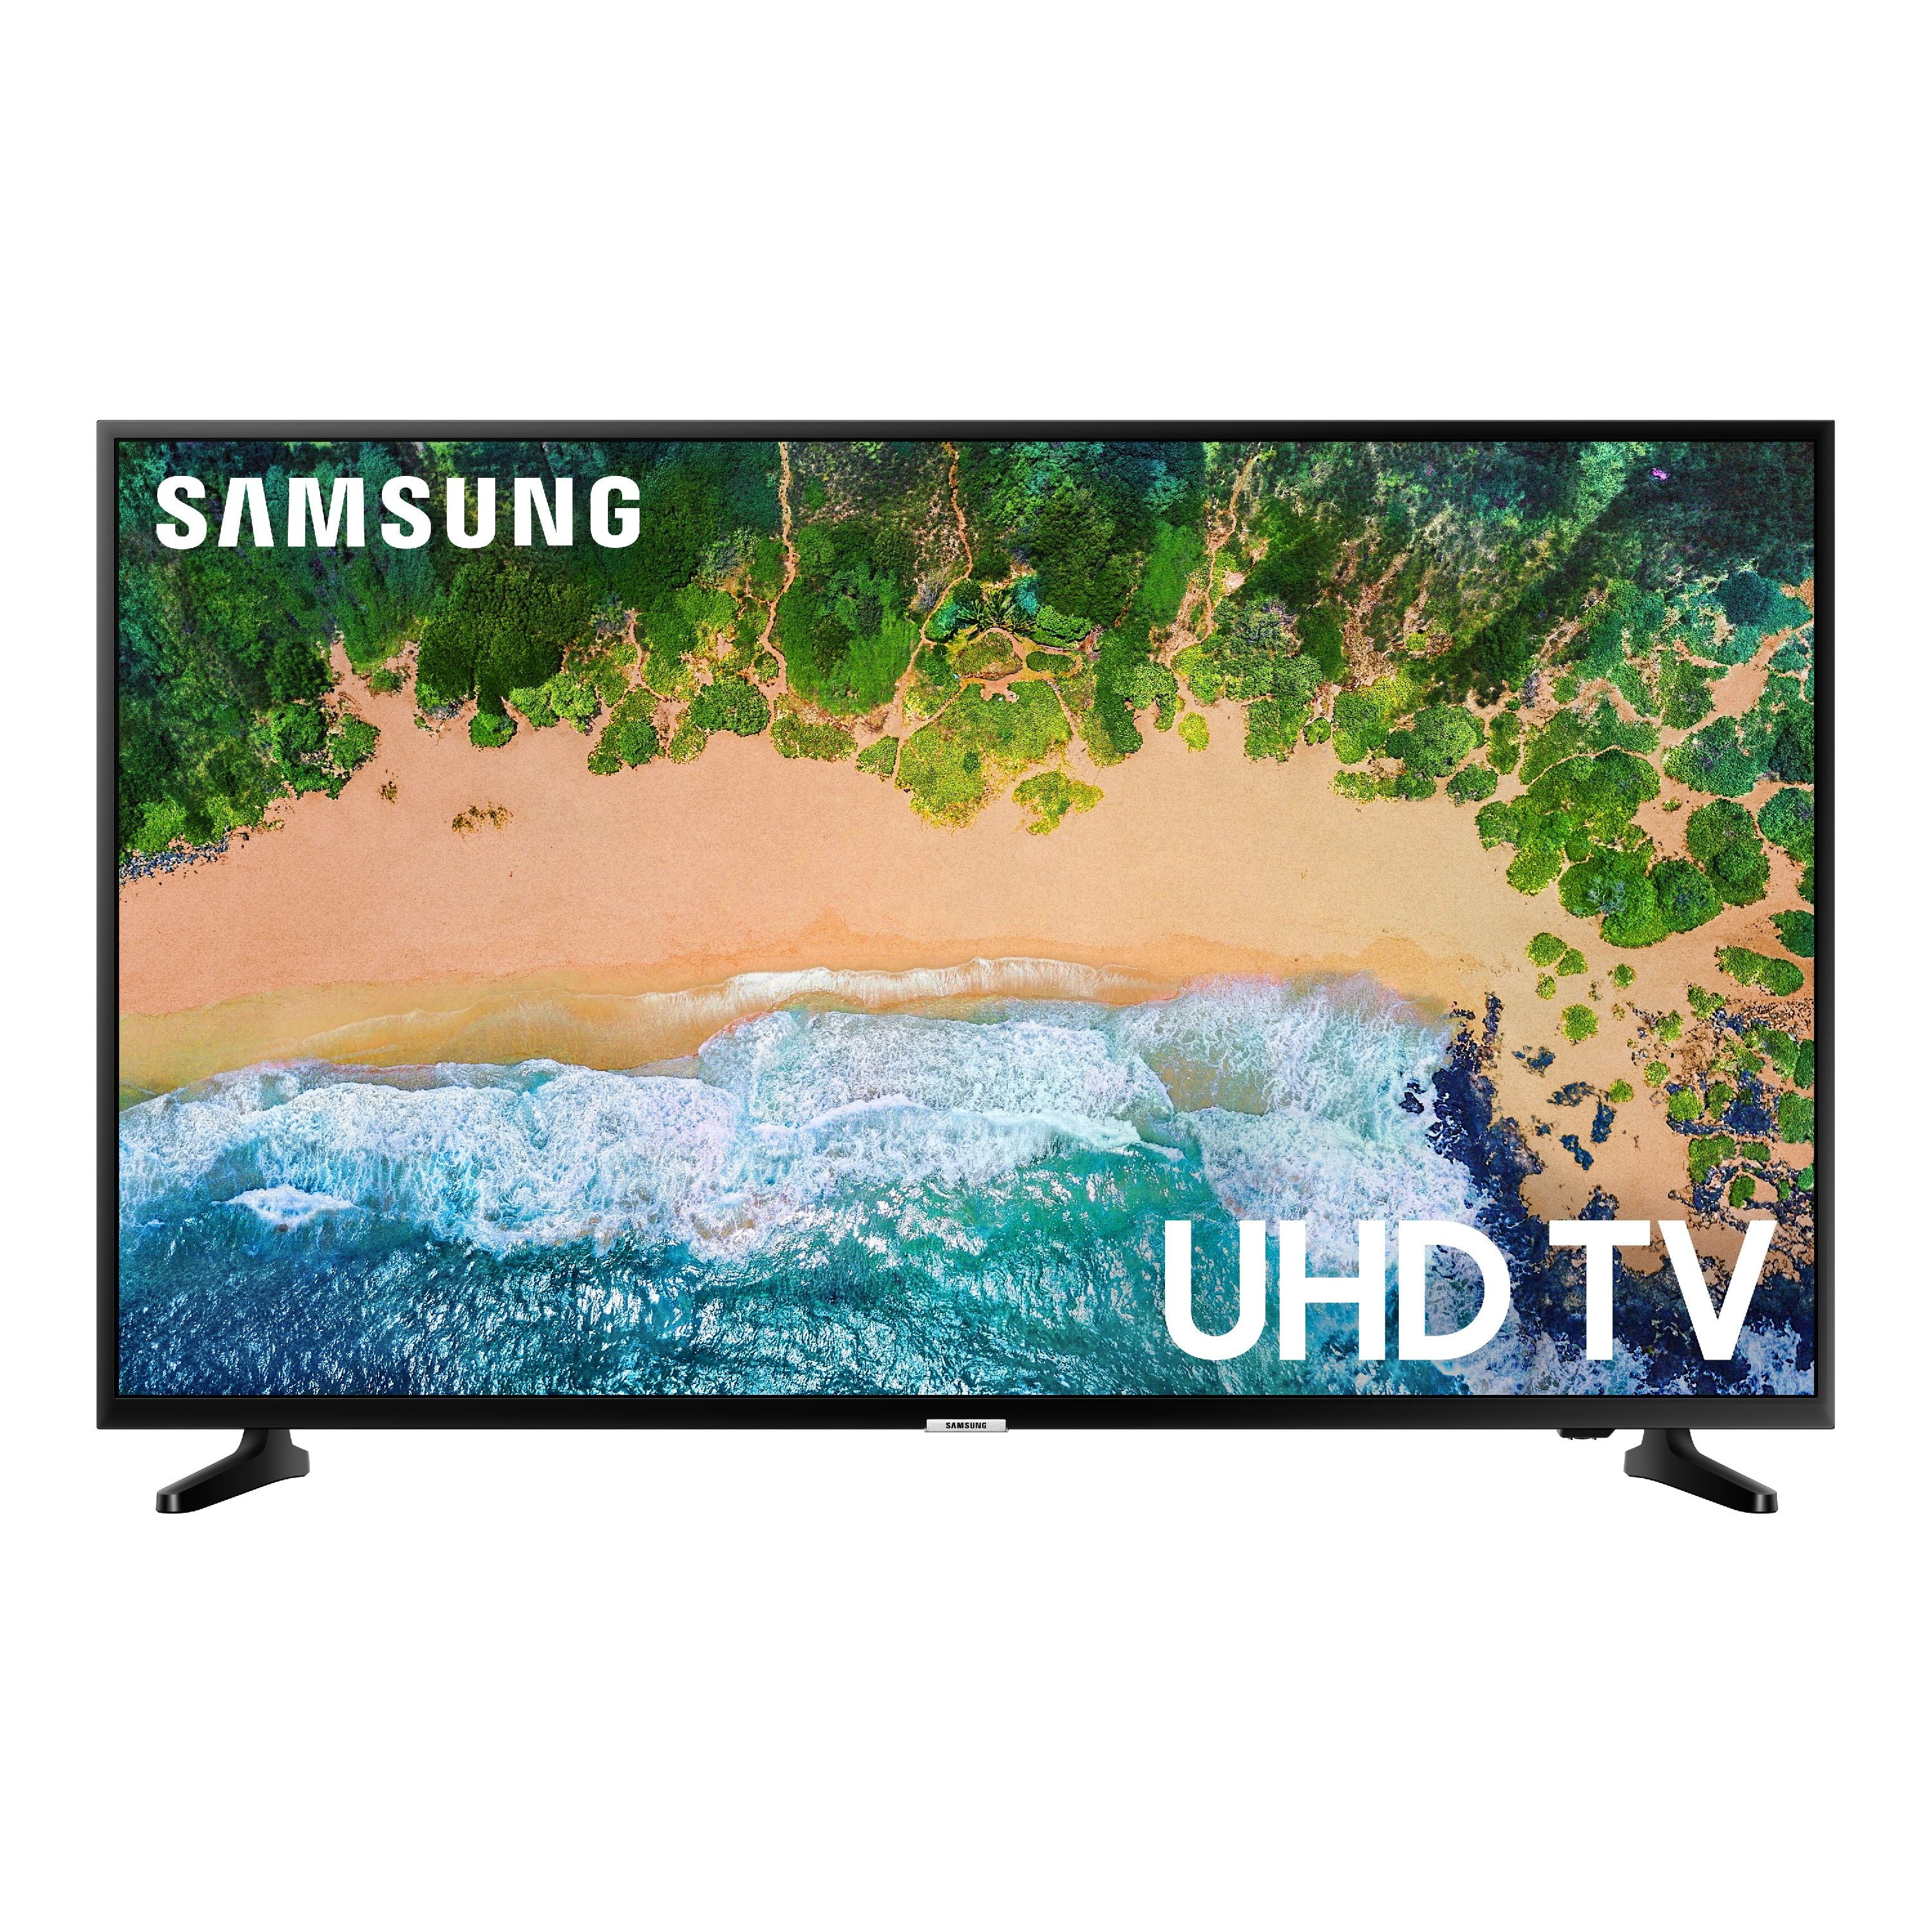 SAMSUNG 50 Class 4K UHD 2160p LED Smart TV with HDR UN50NU6900